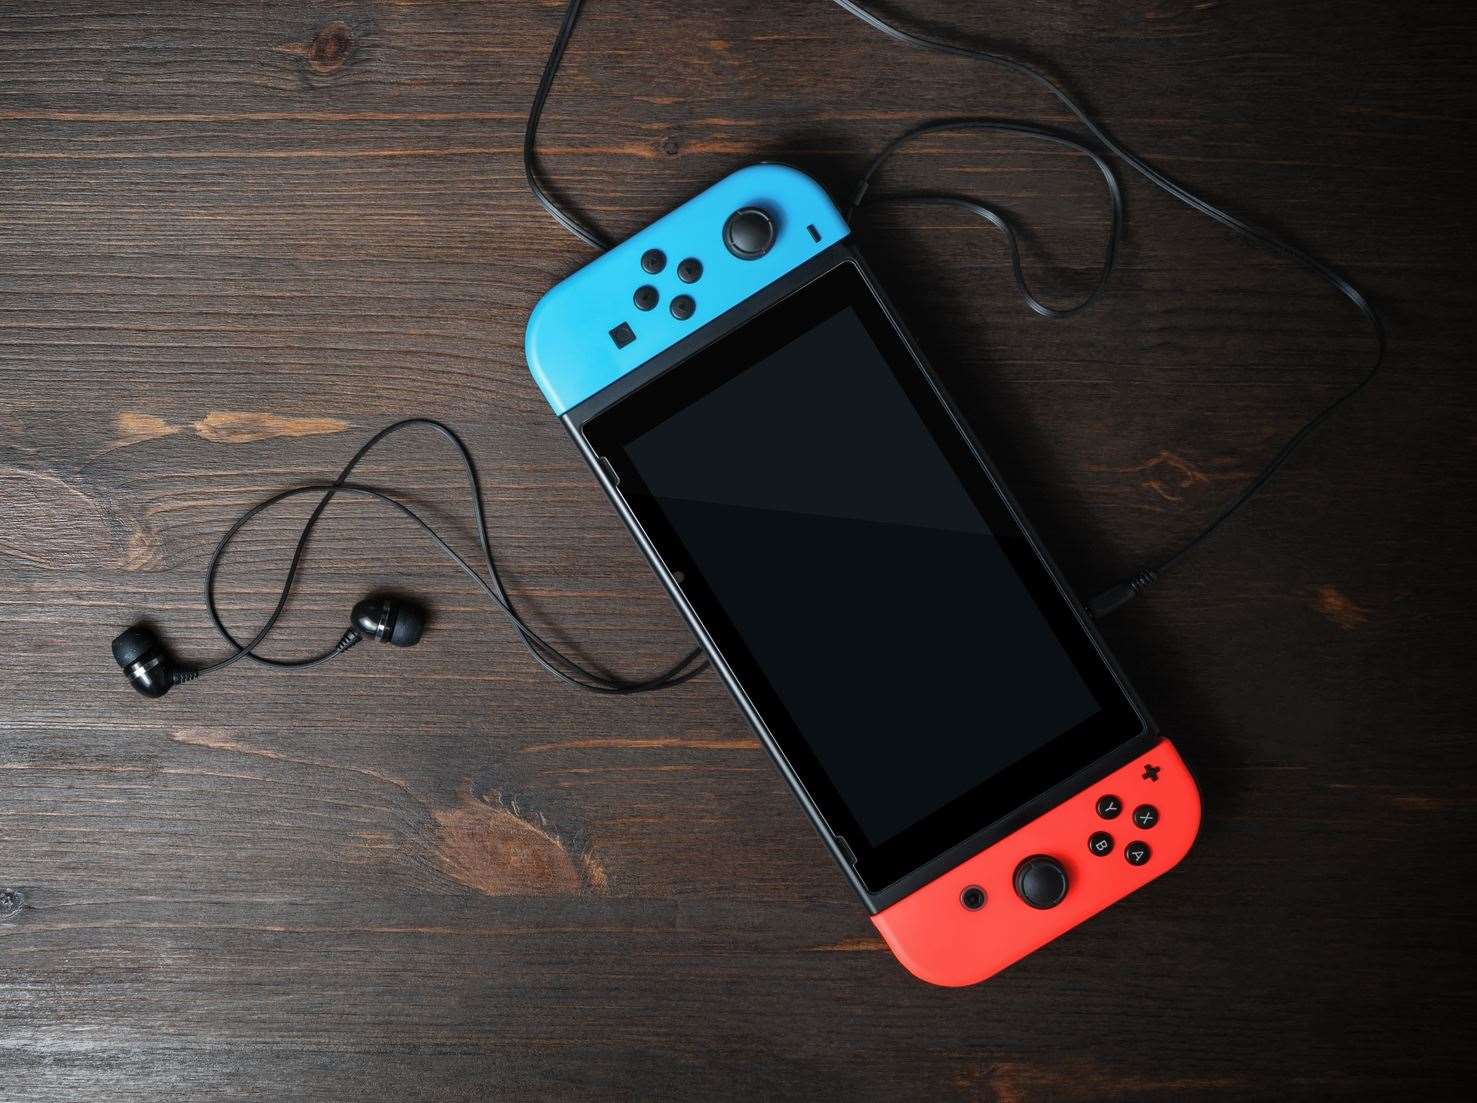 A Nintendo Switch game console was one of the items stolen last week